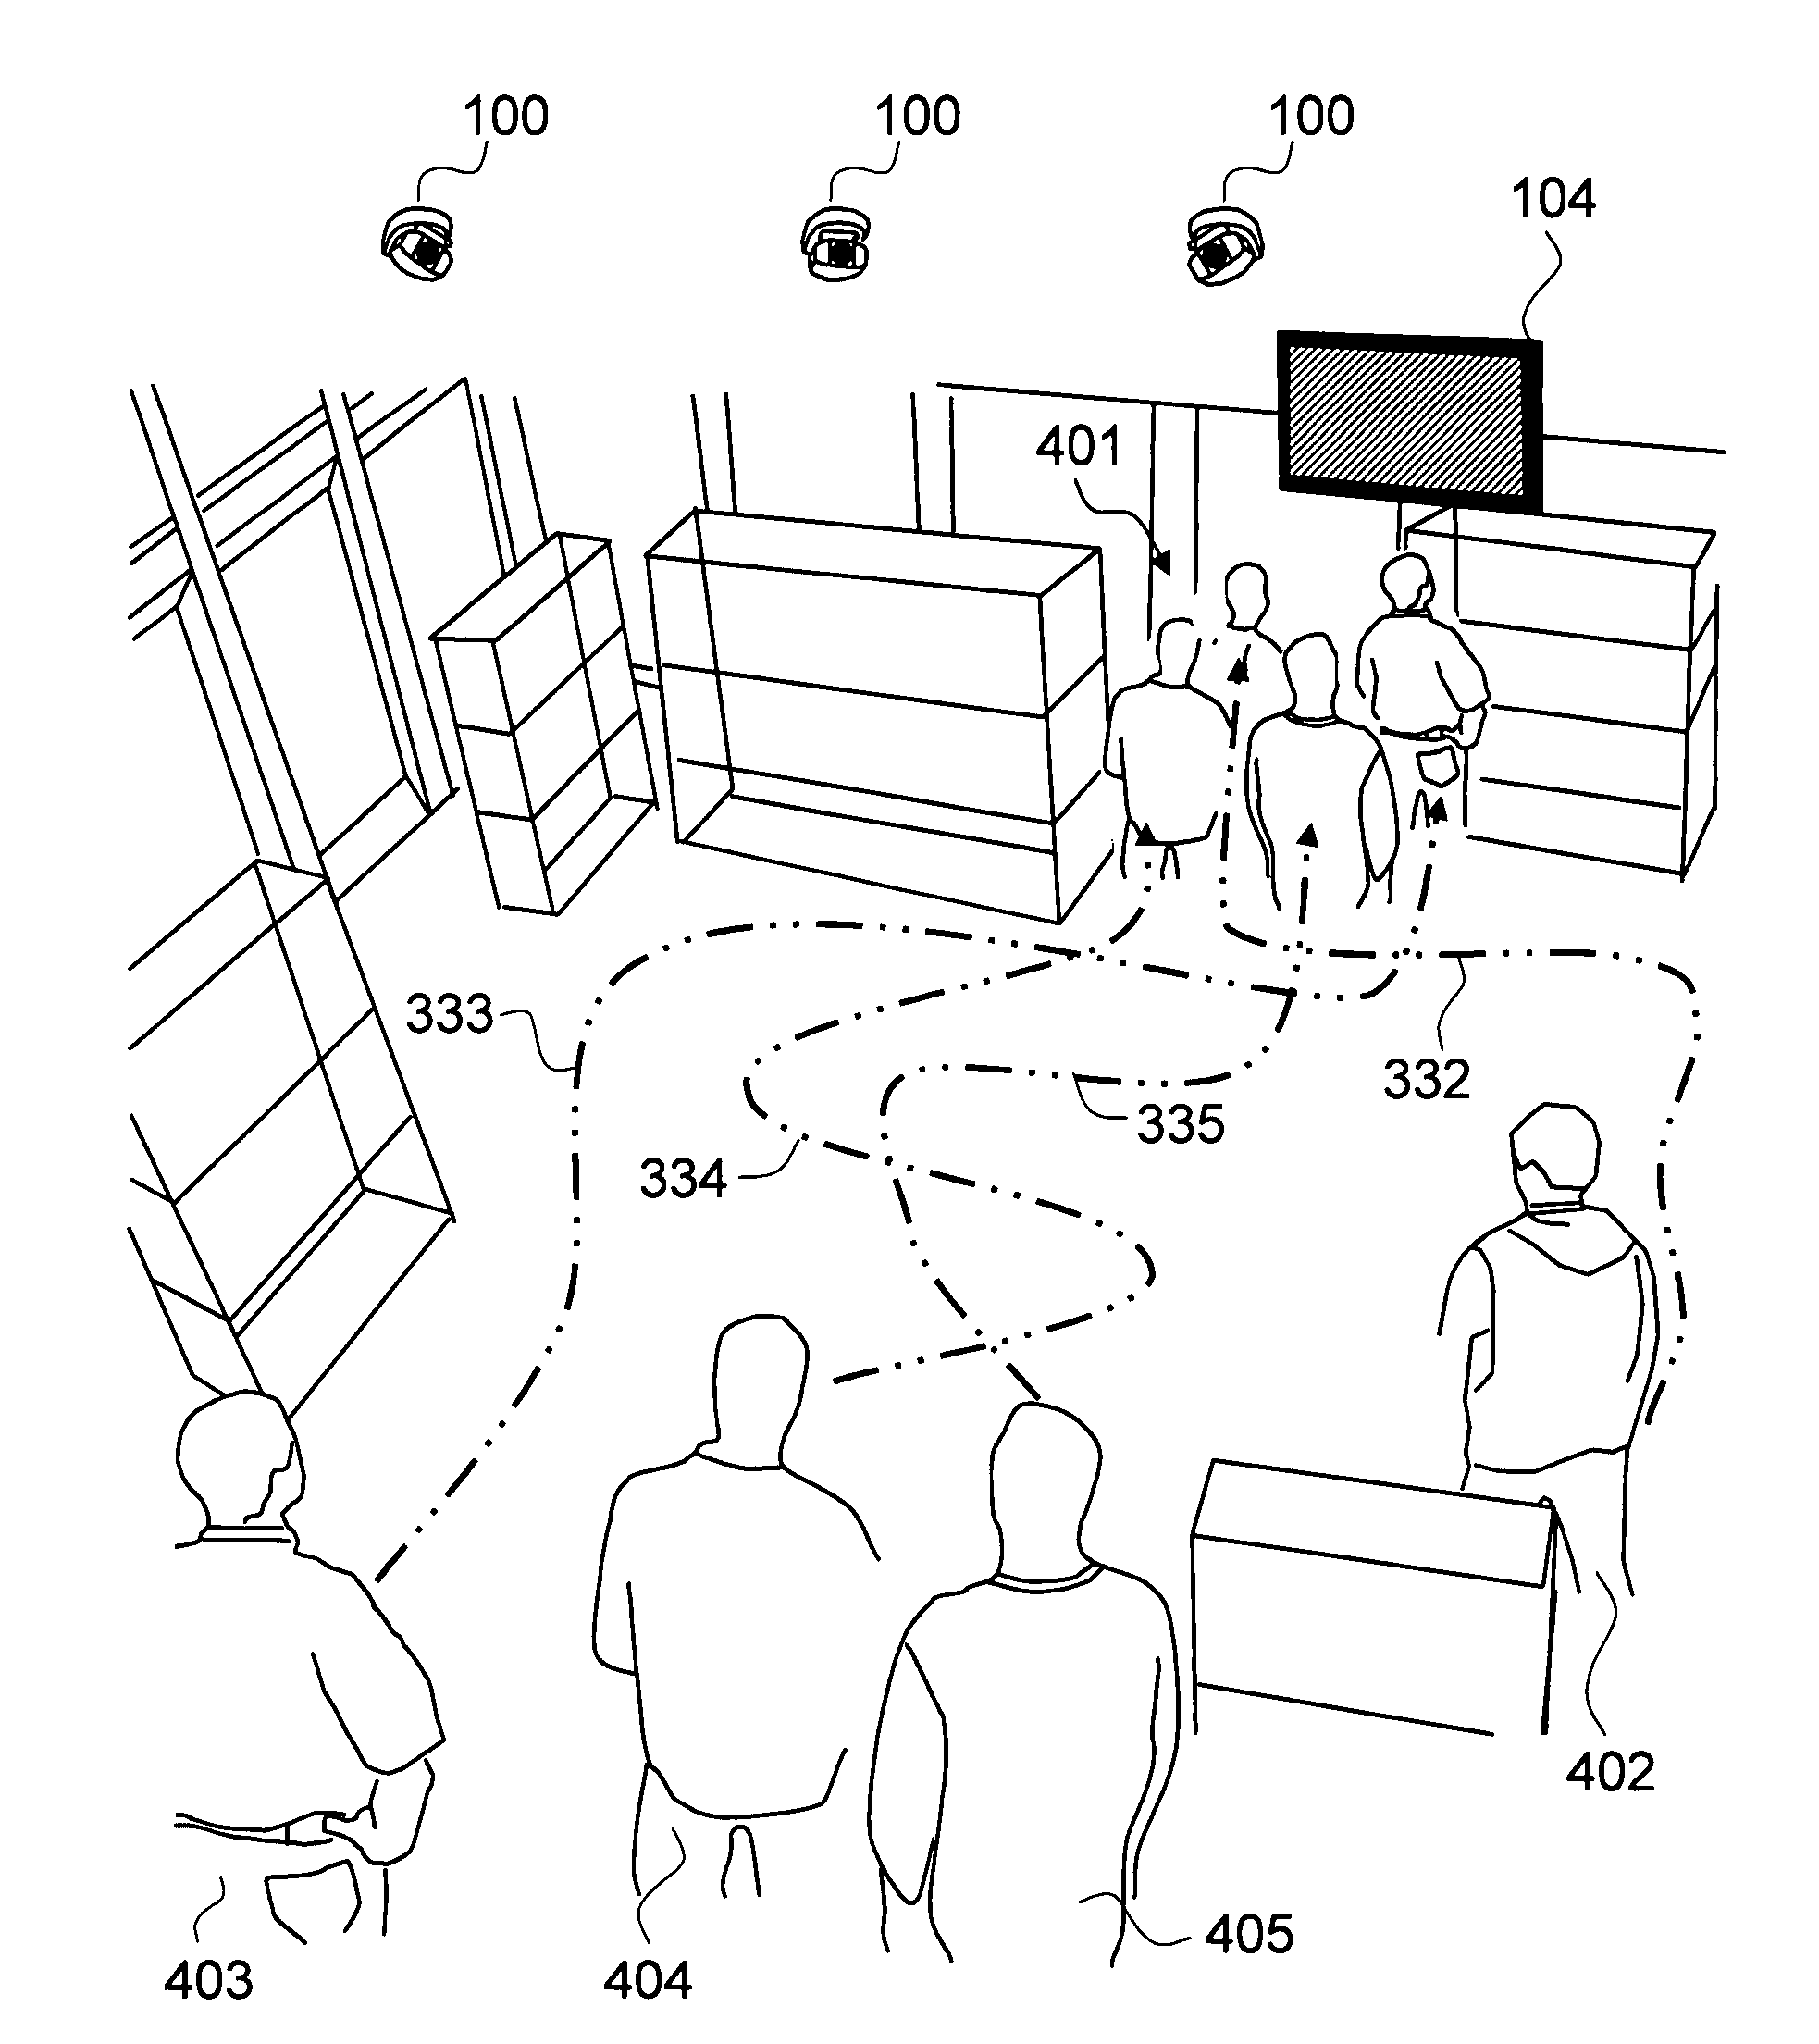 Method and system for narrowcasting based on automatic analysis of customer behavior in a retail store